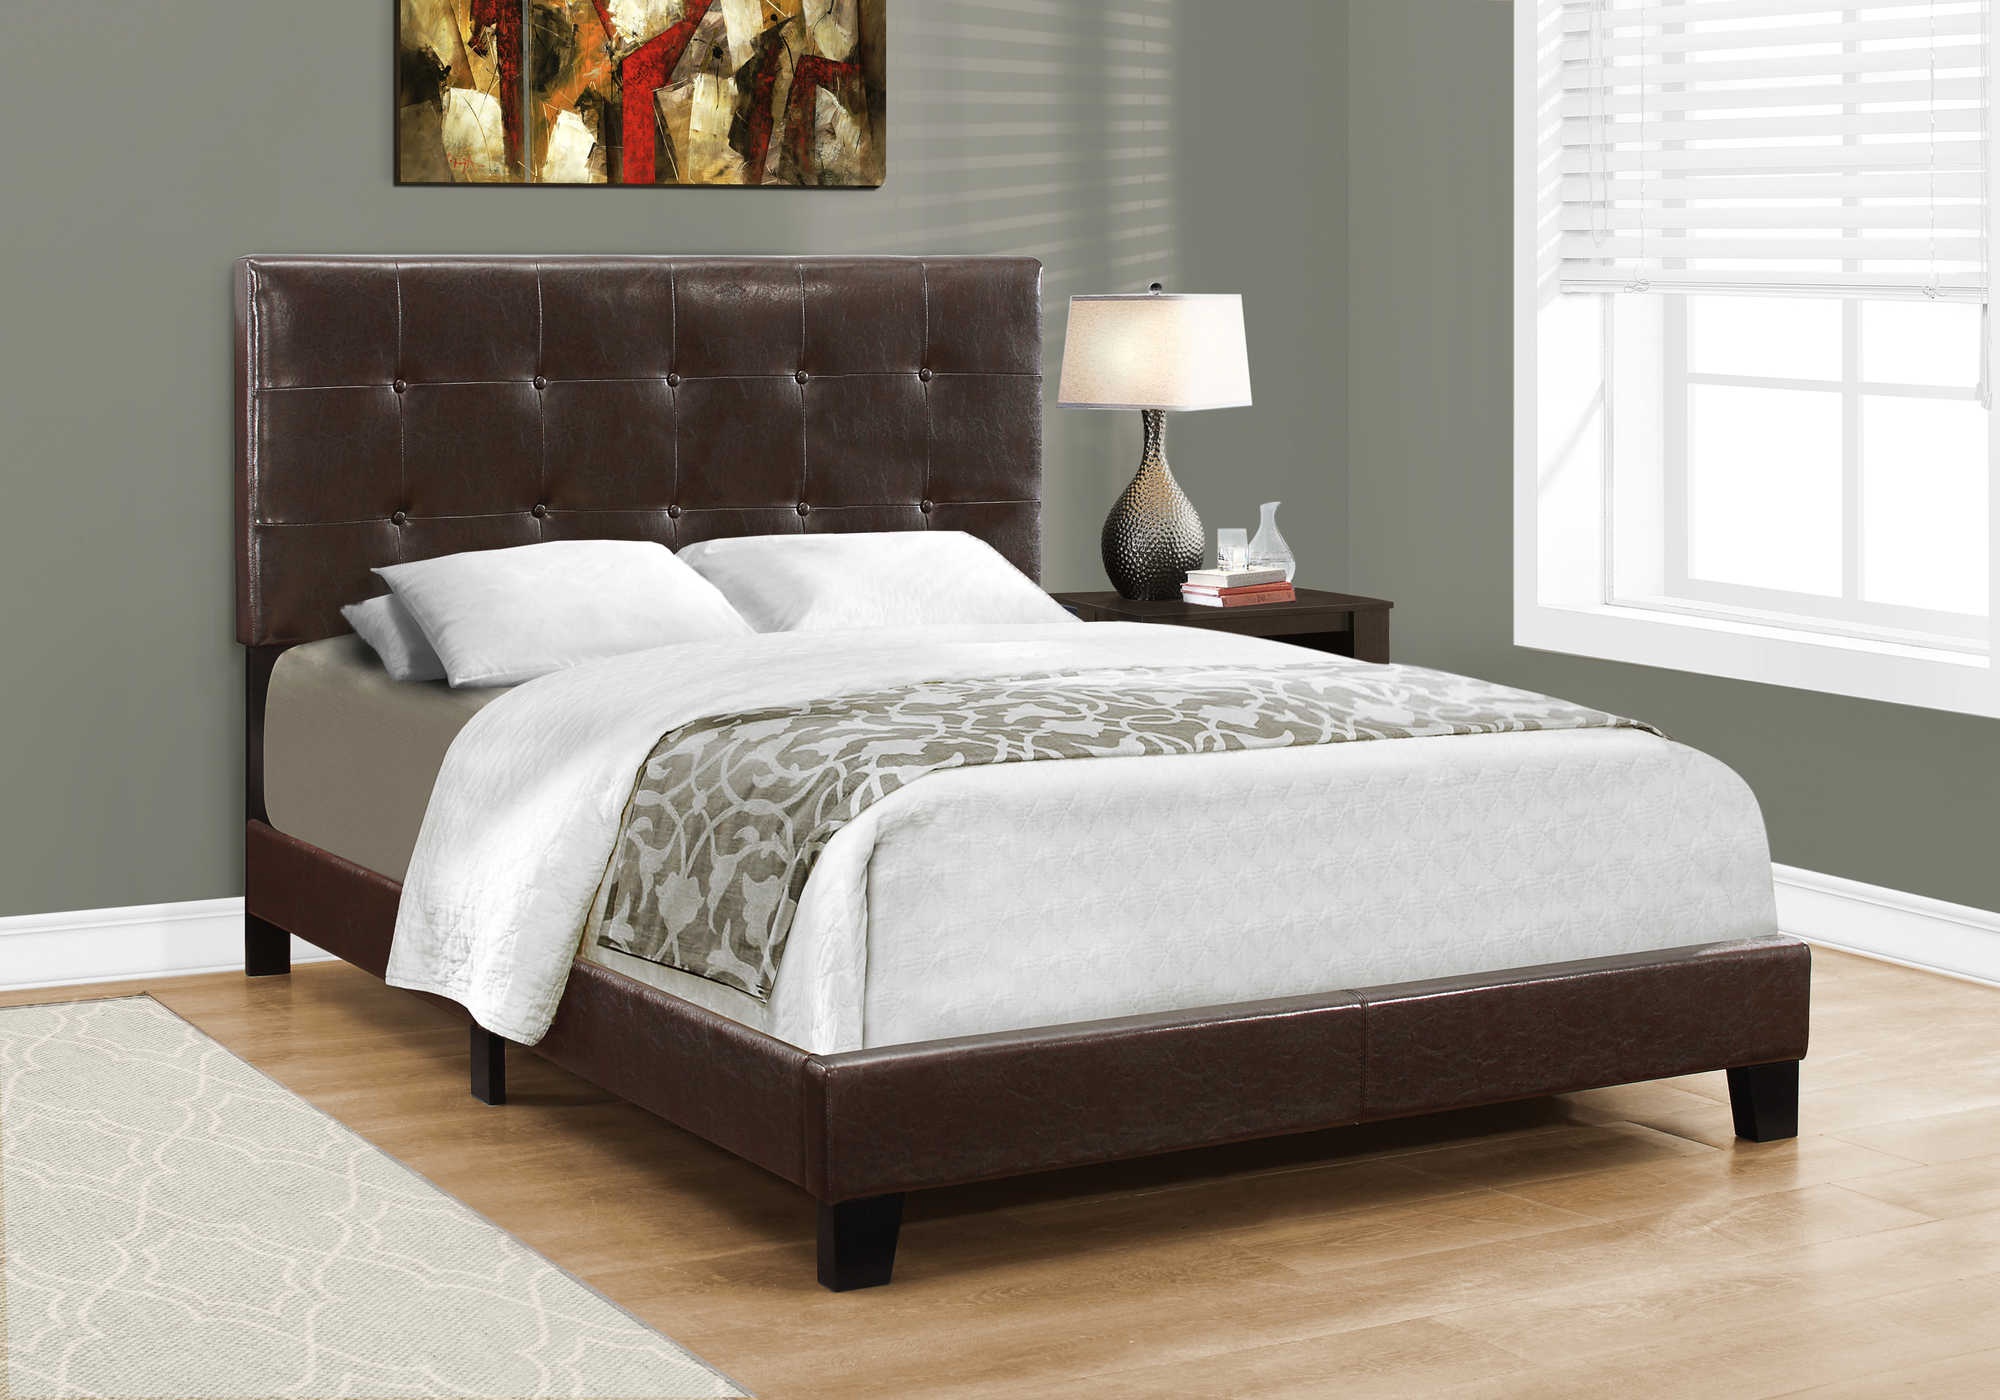 BED - FULL SIZE / DARK BROWN LEATHER-LOOK